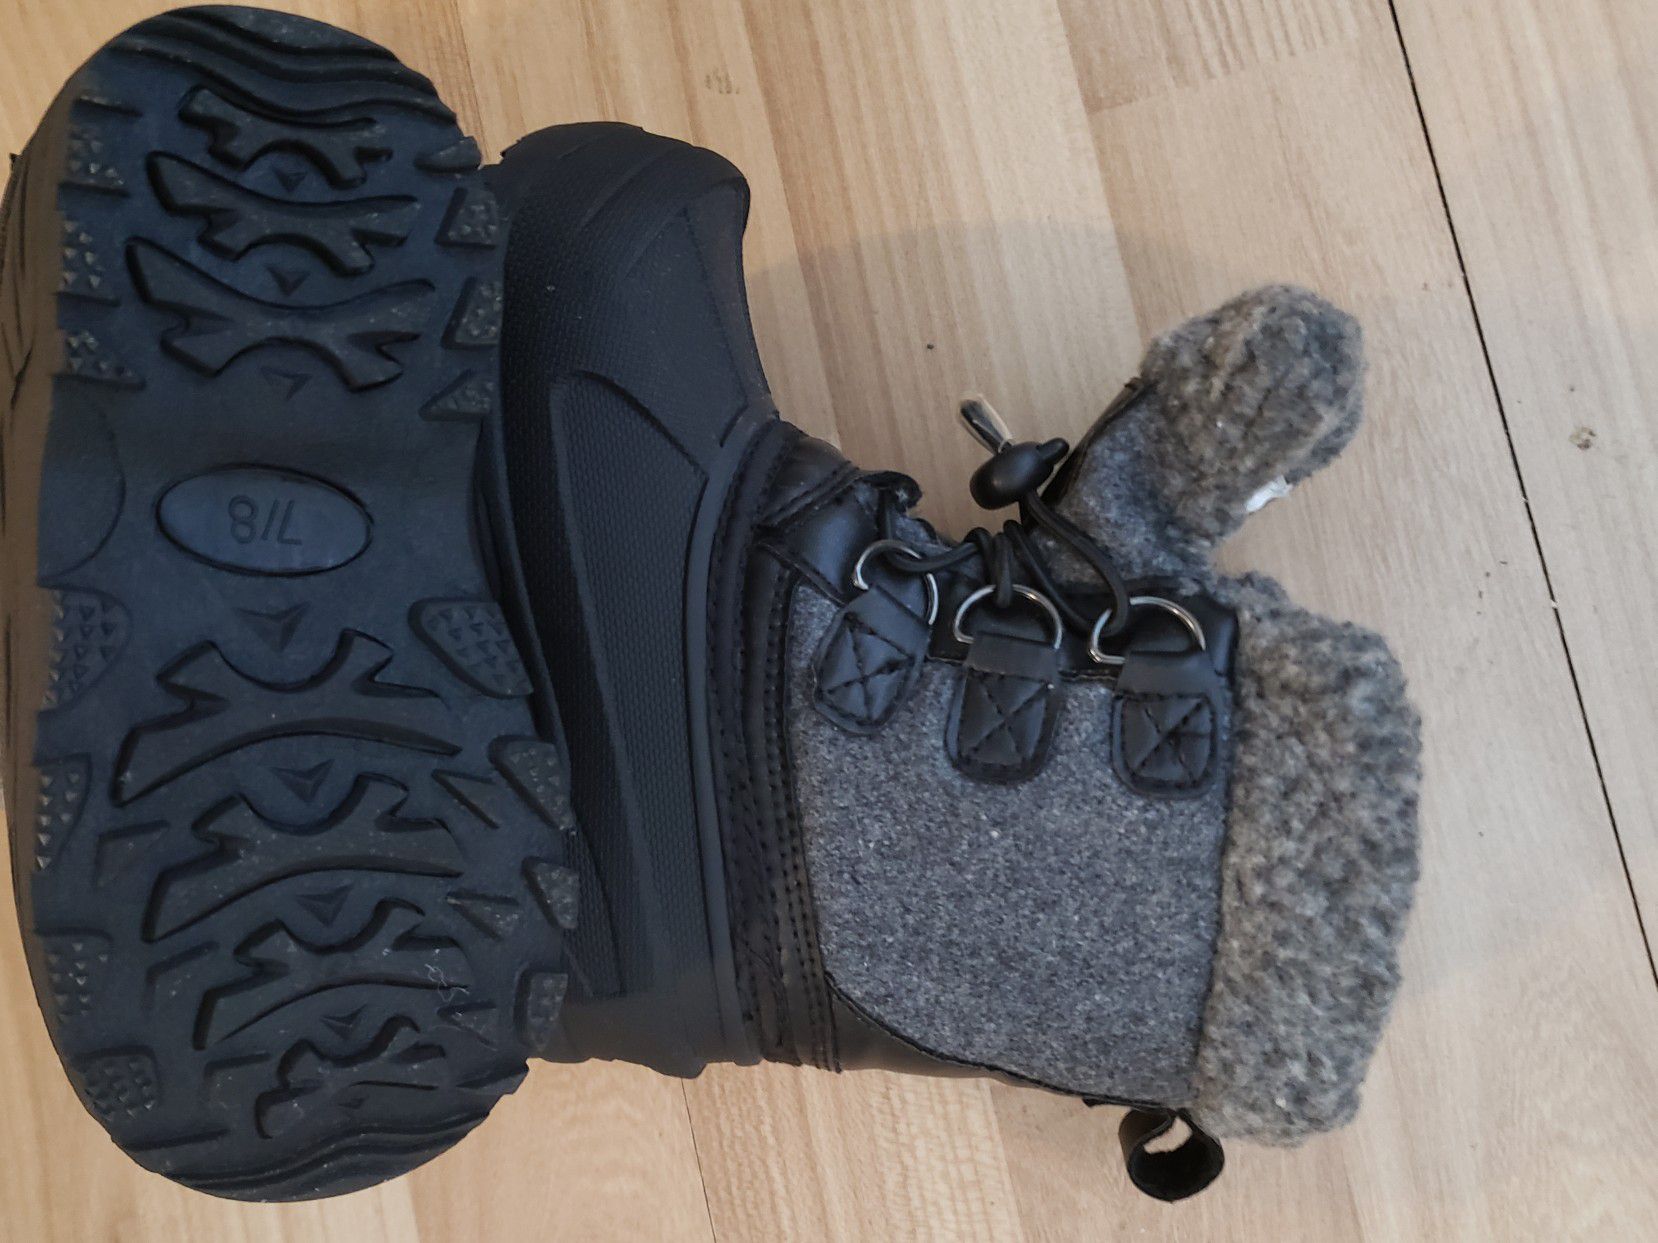 Snow Boots- Toddler M 7/8